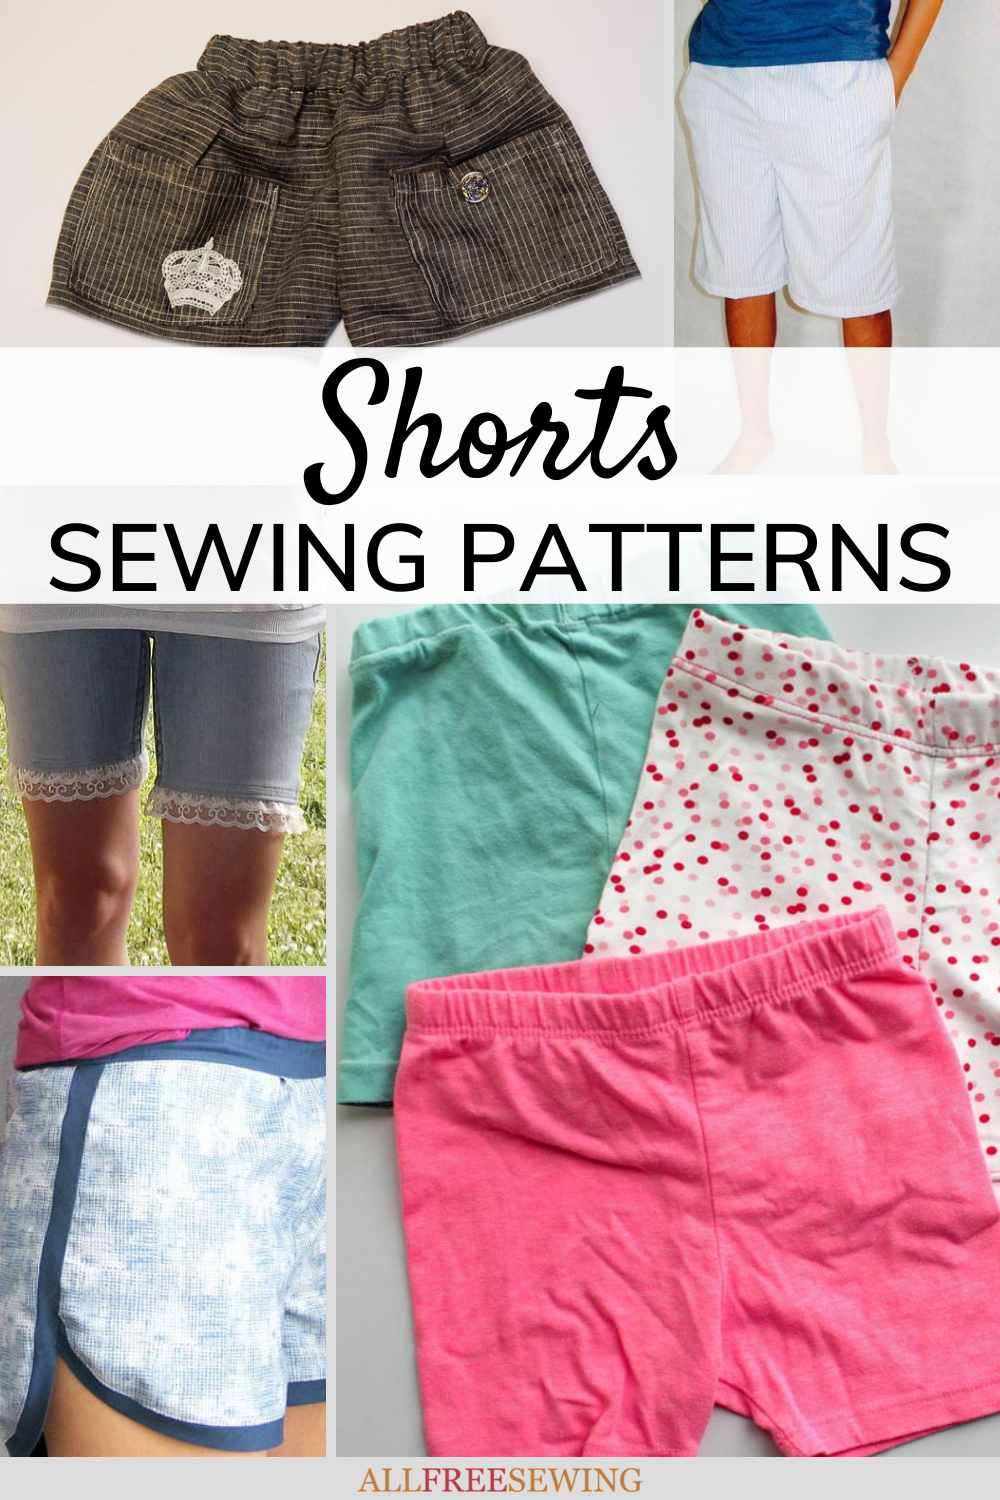 40+ Free Shorts Patterns (to Sew) | AllFreeSewing.com